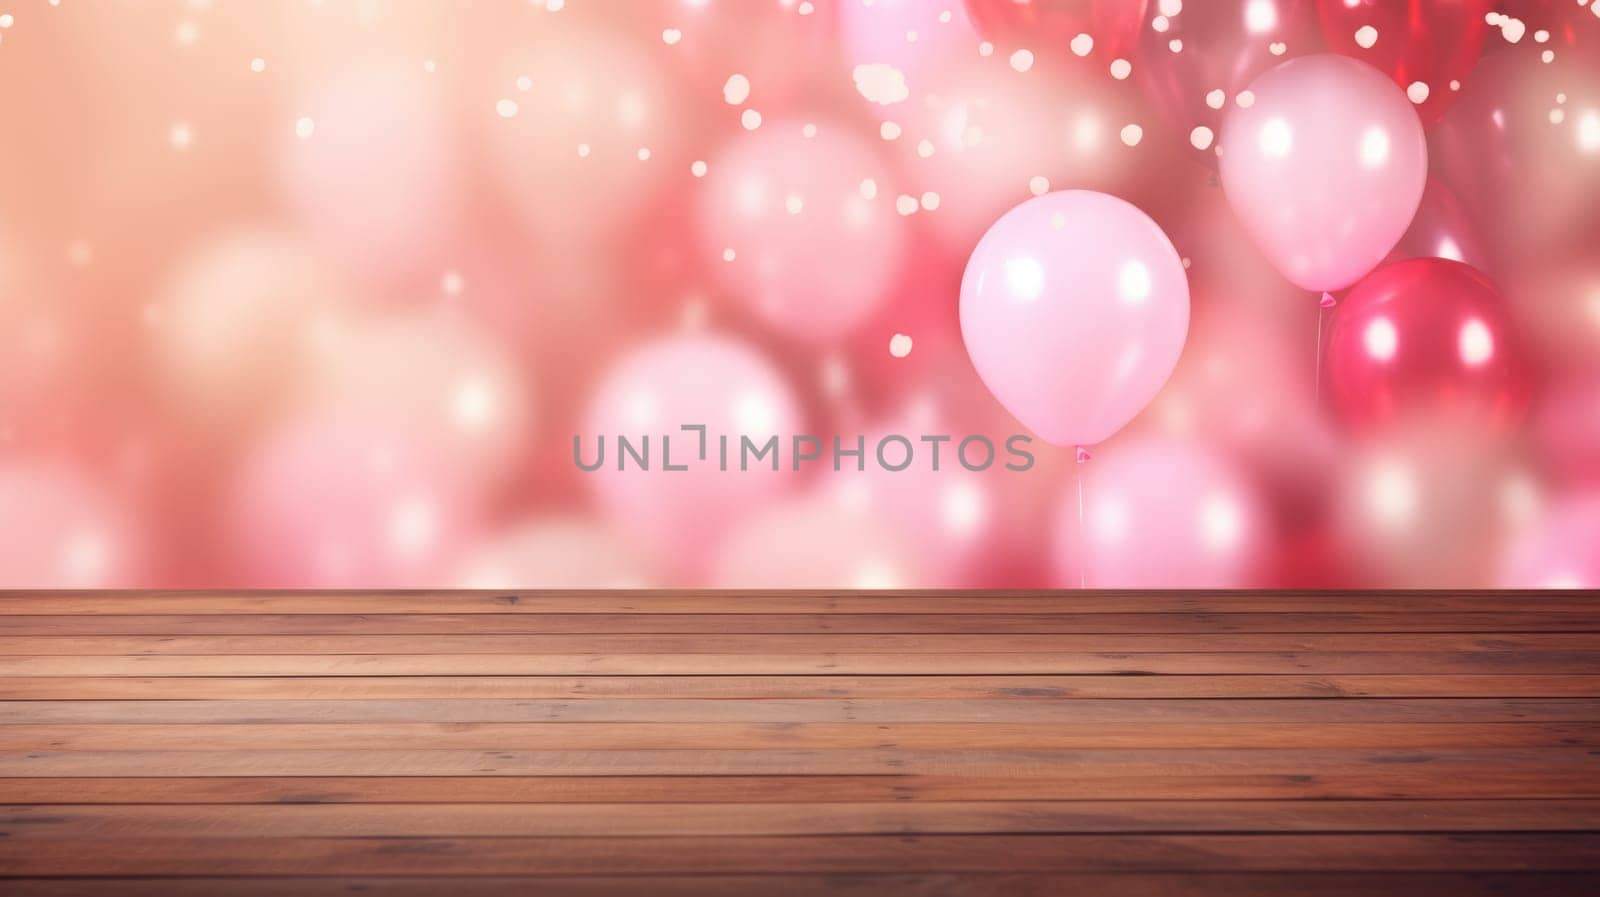 Empty wooden table in the foreground. Blurred background with pink balloons by natali_brill